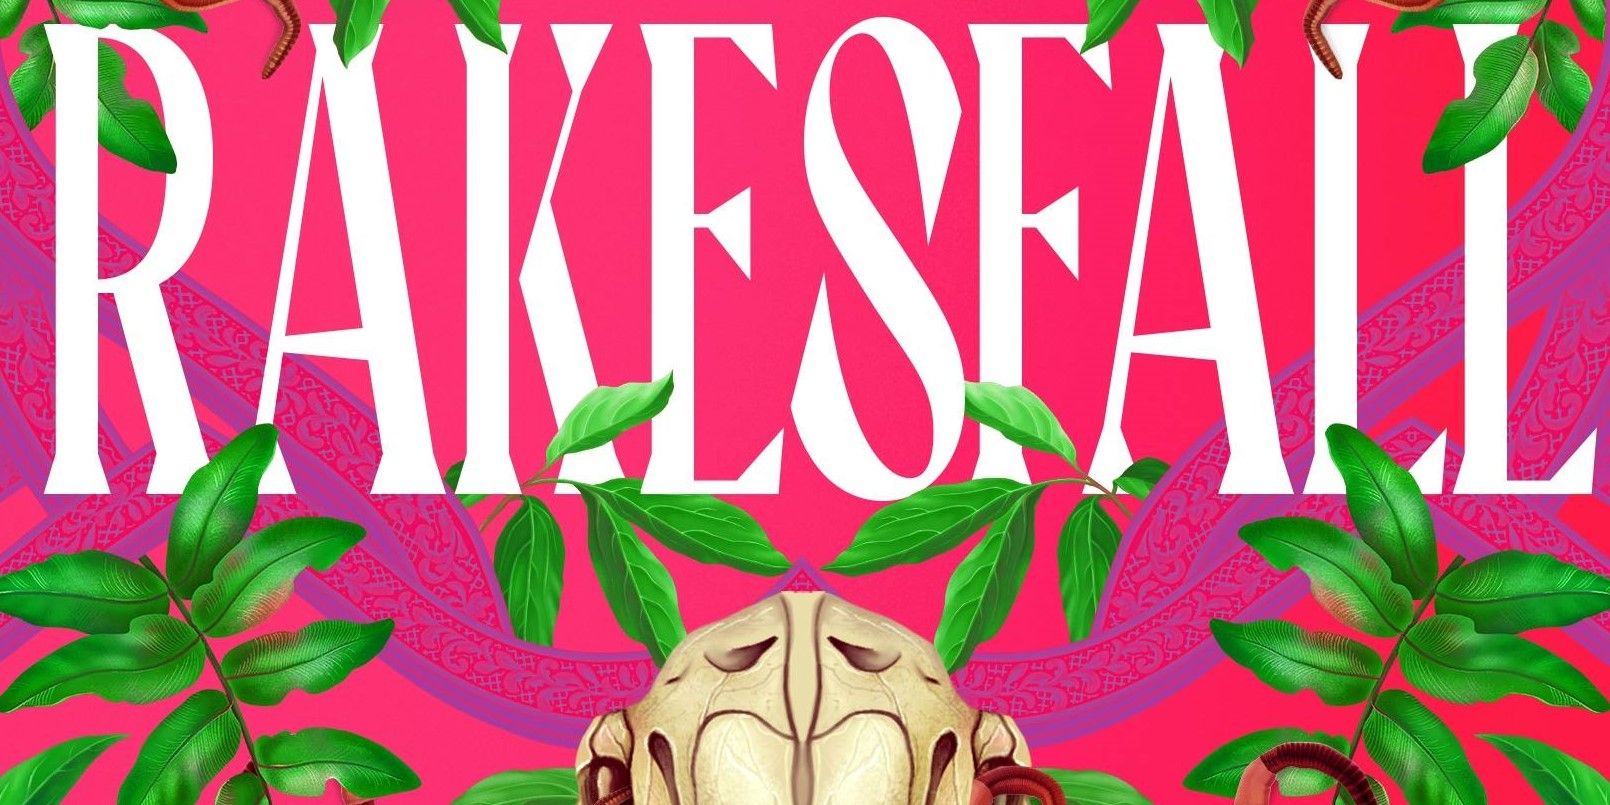 Rakesfall cover featuring a pink background, leaves, and the top of an animal skull